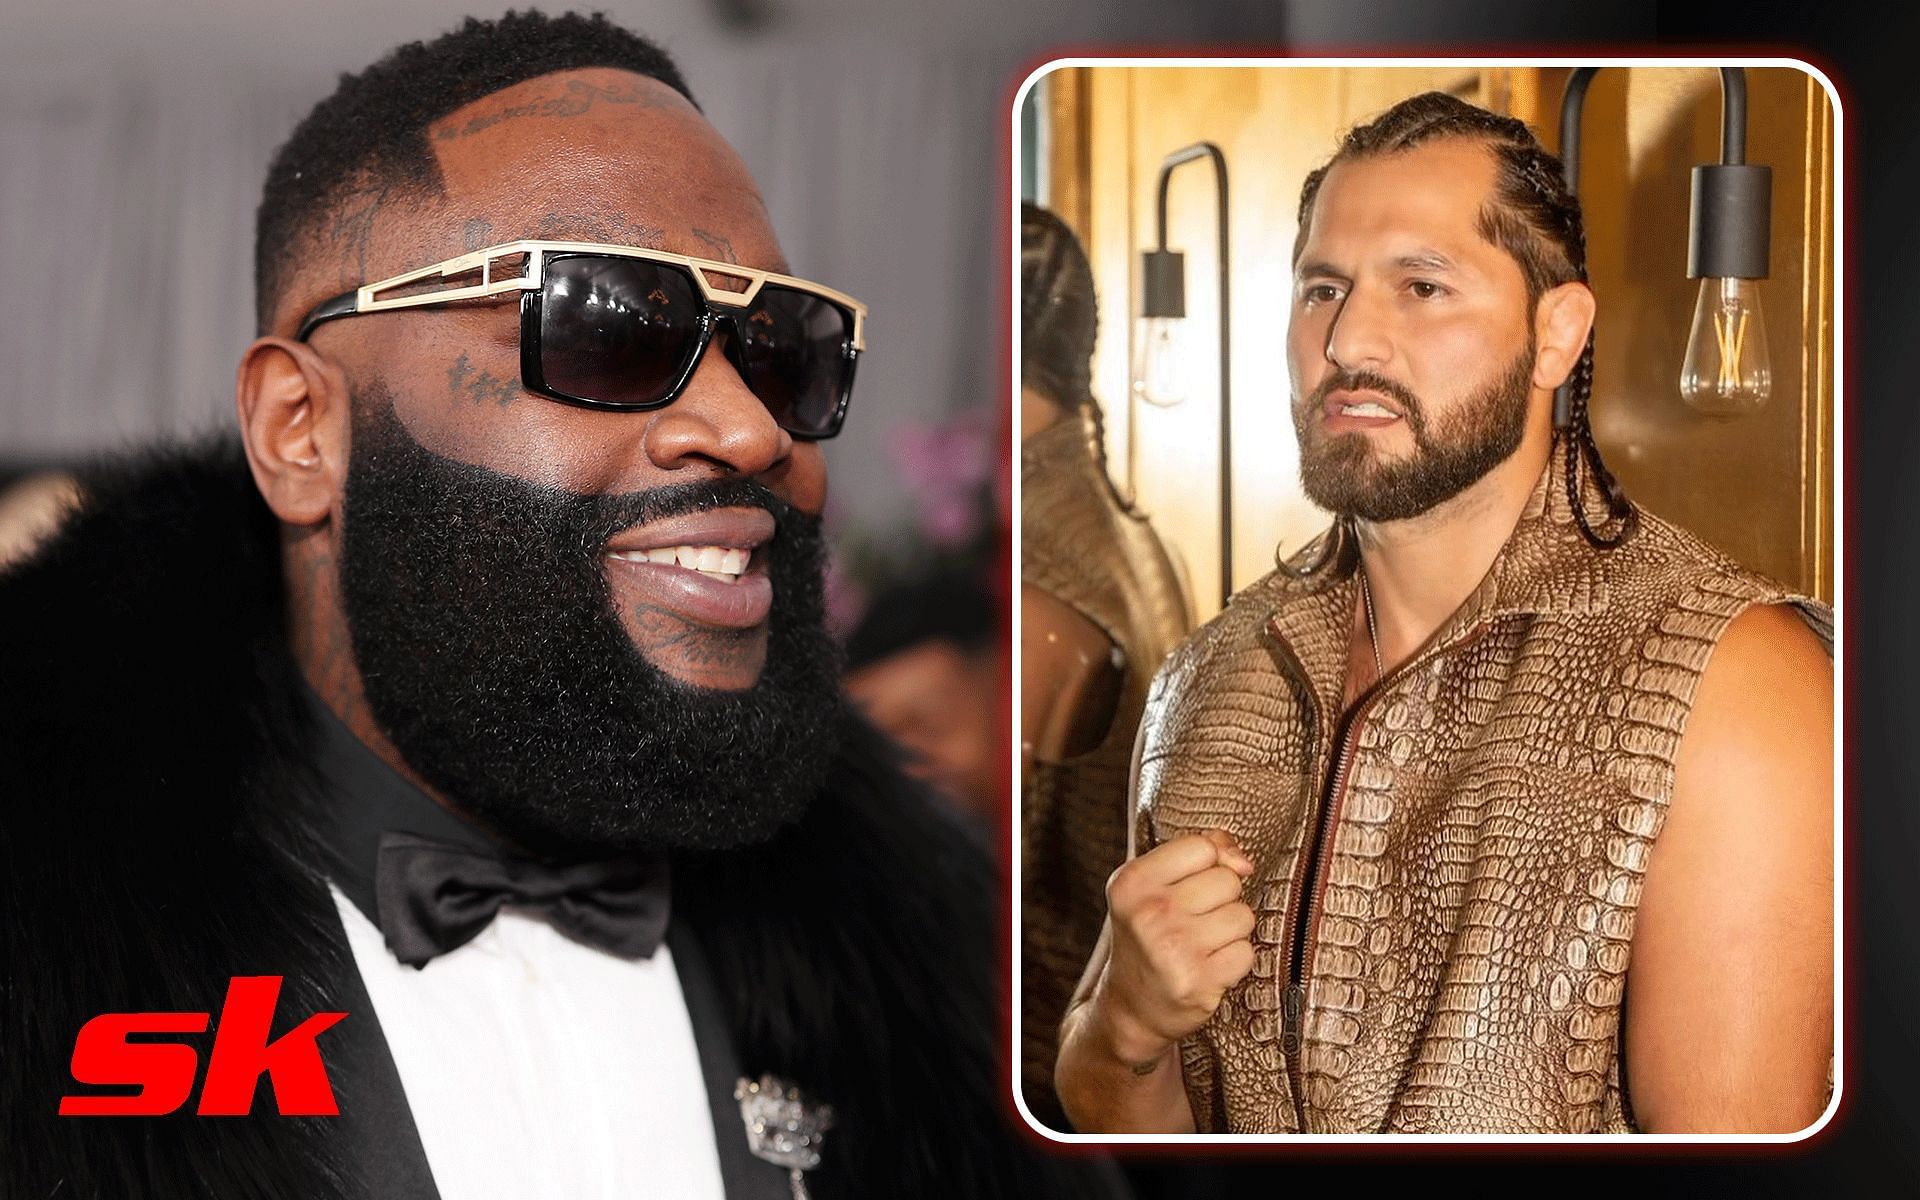 Rick Ross (left) seems to disapprove of Jorge Masvidal